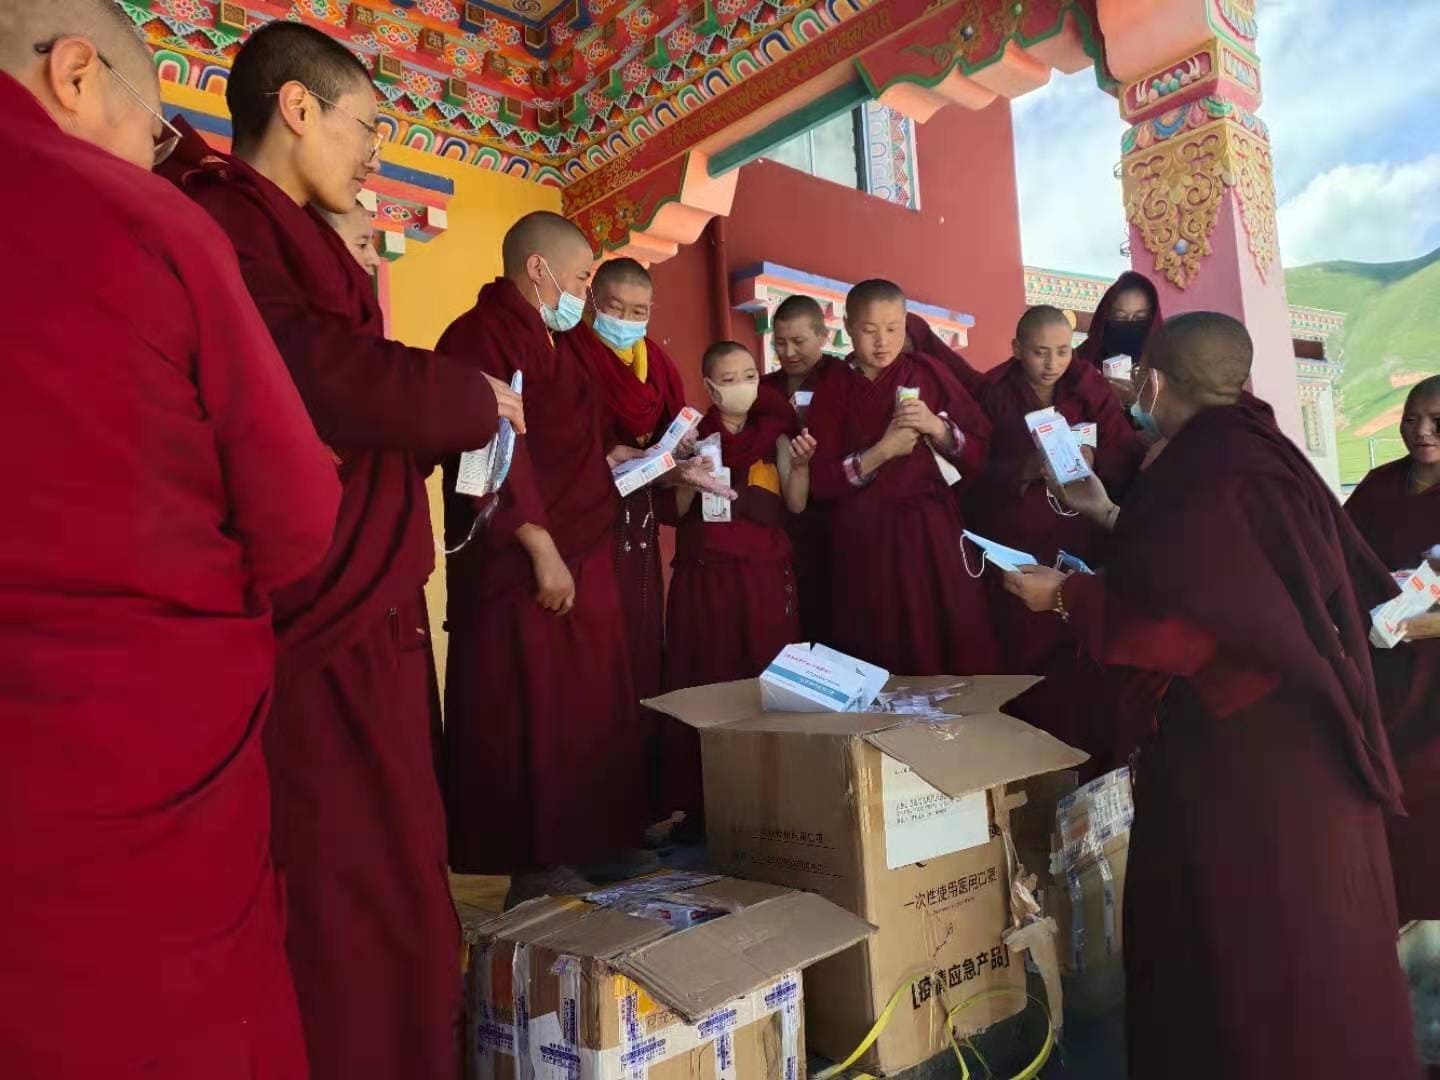 Supplies for remote mountainous areas－Dual-use lamps for Buddhist Academies